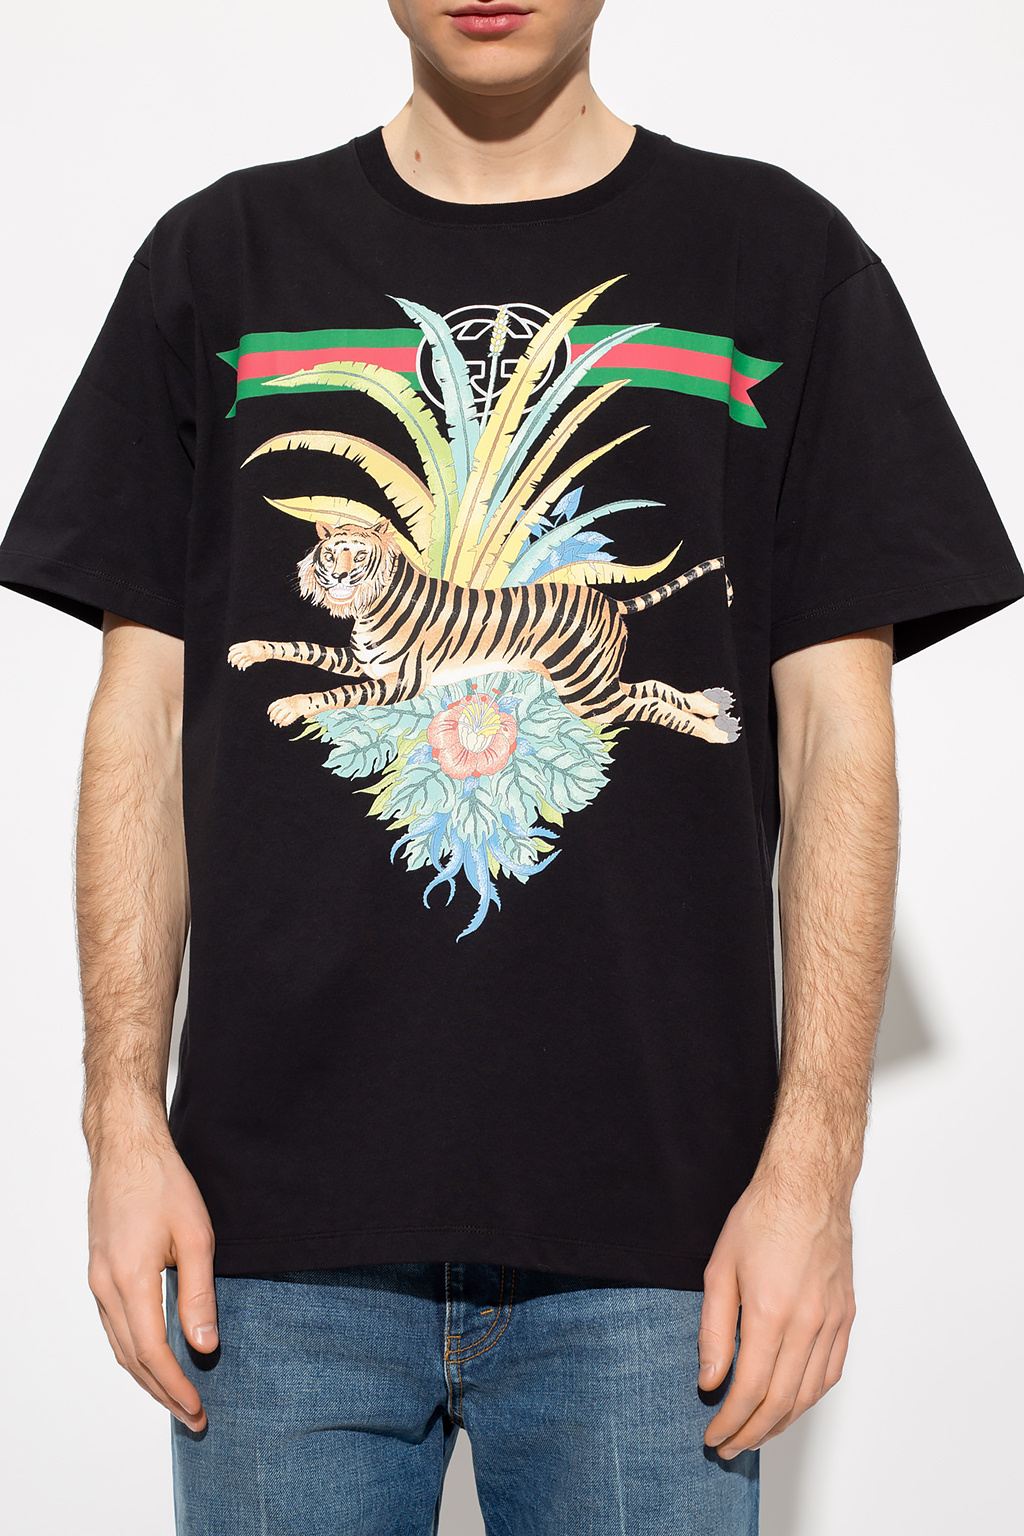 Black Printed T-shirt from the 'Gucci Tiger' collection Gucci - Vitkac TW